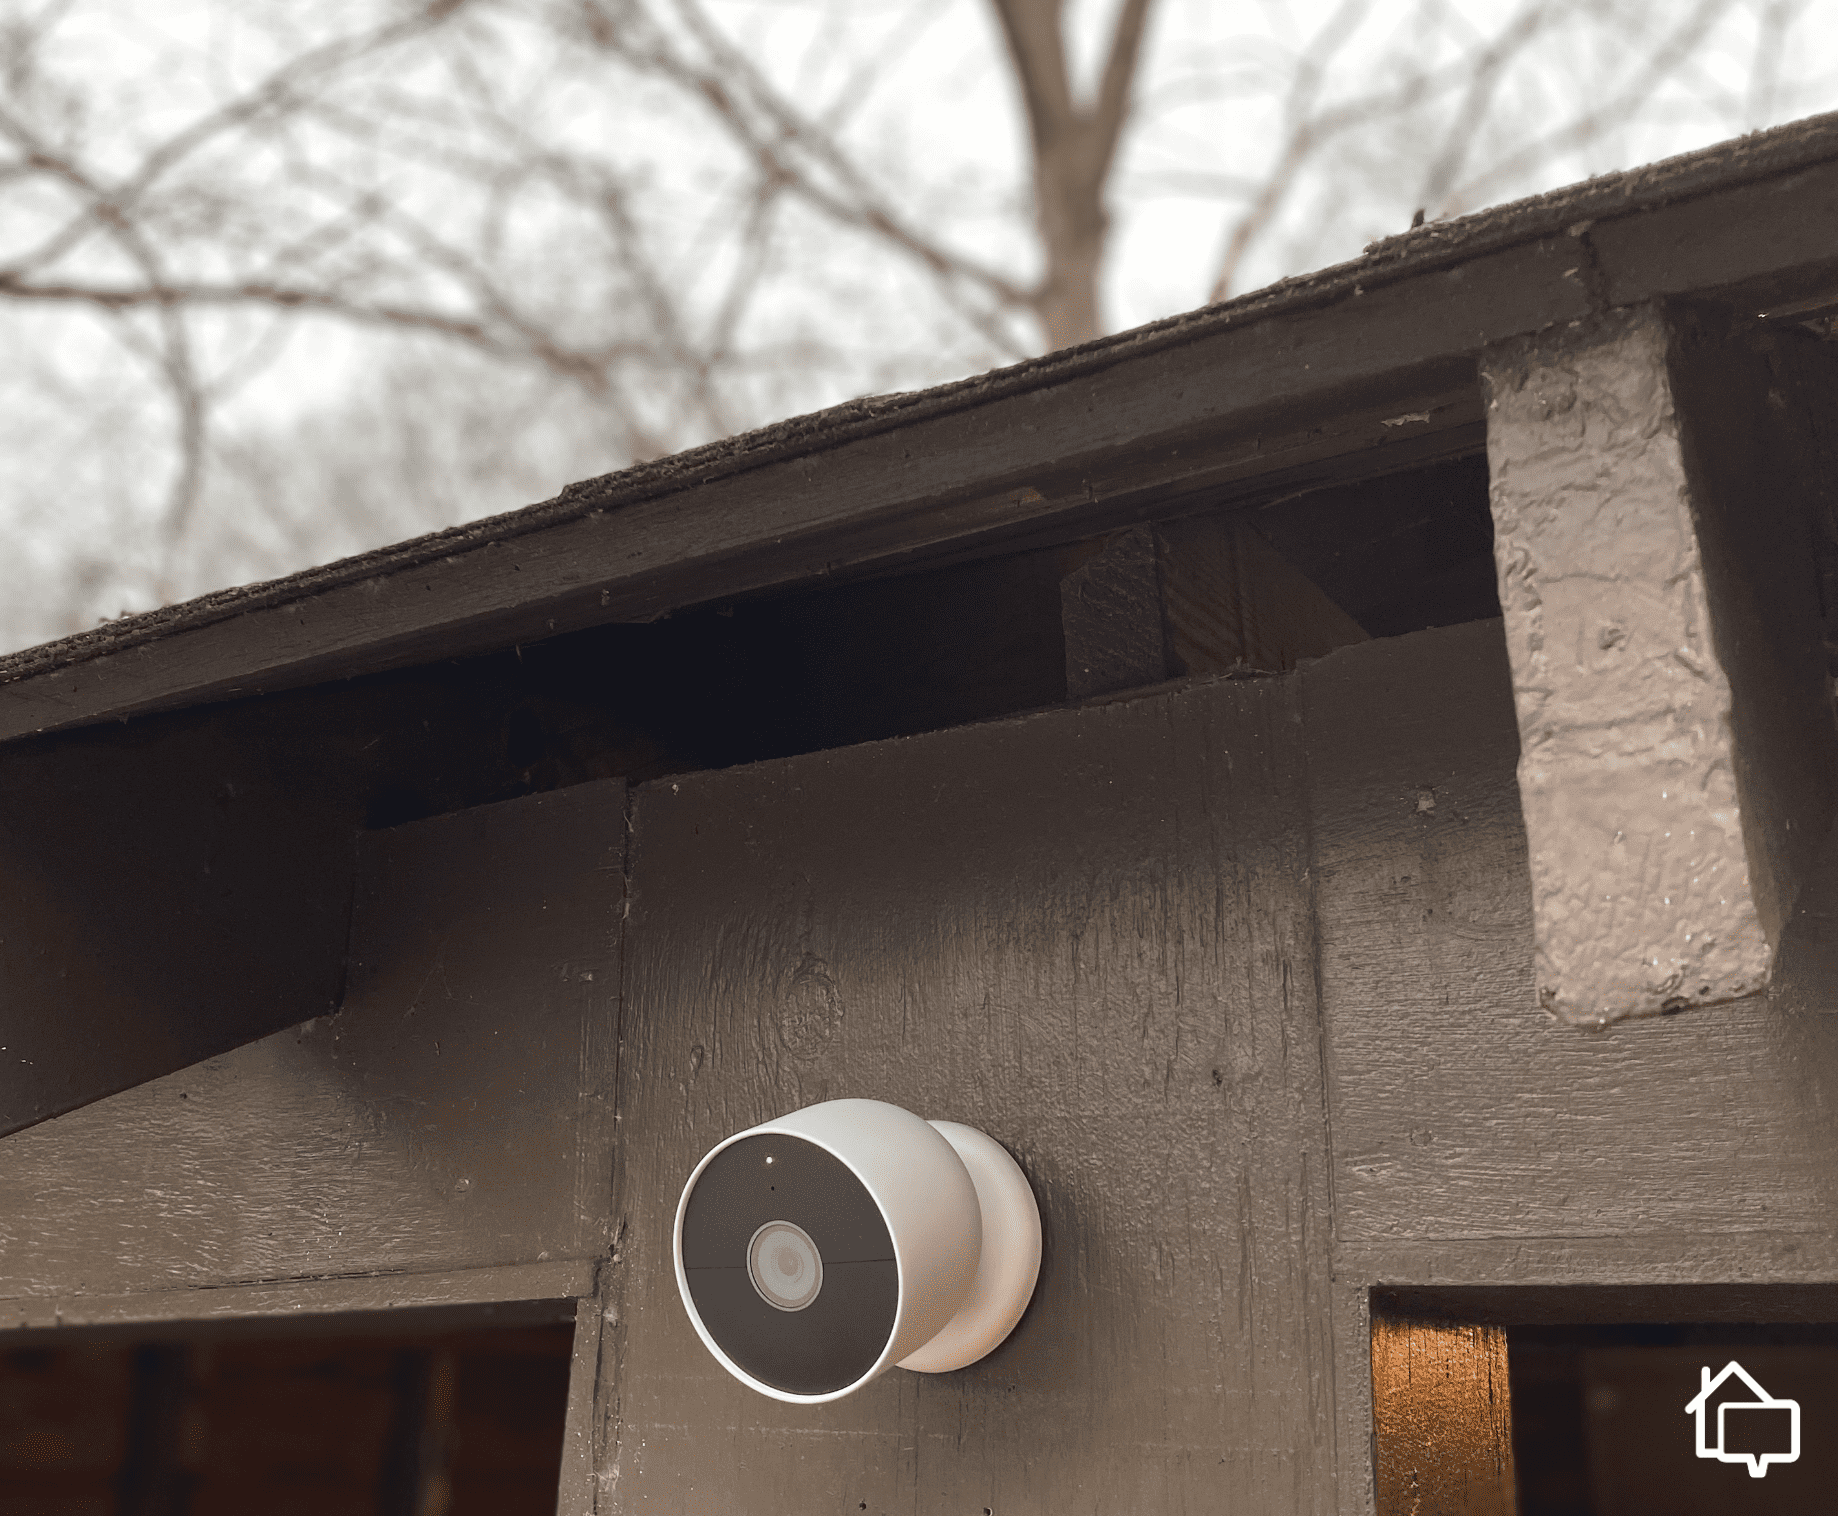 Nest Cam mounted outdoors